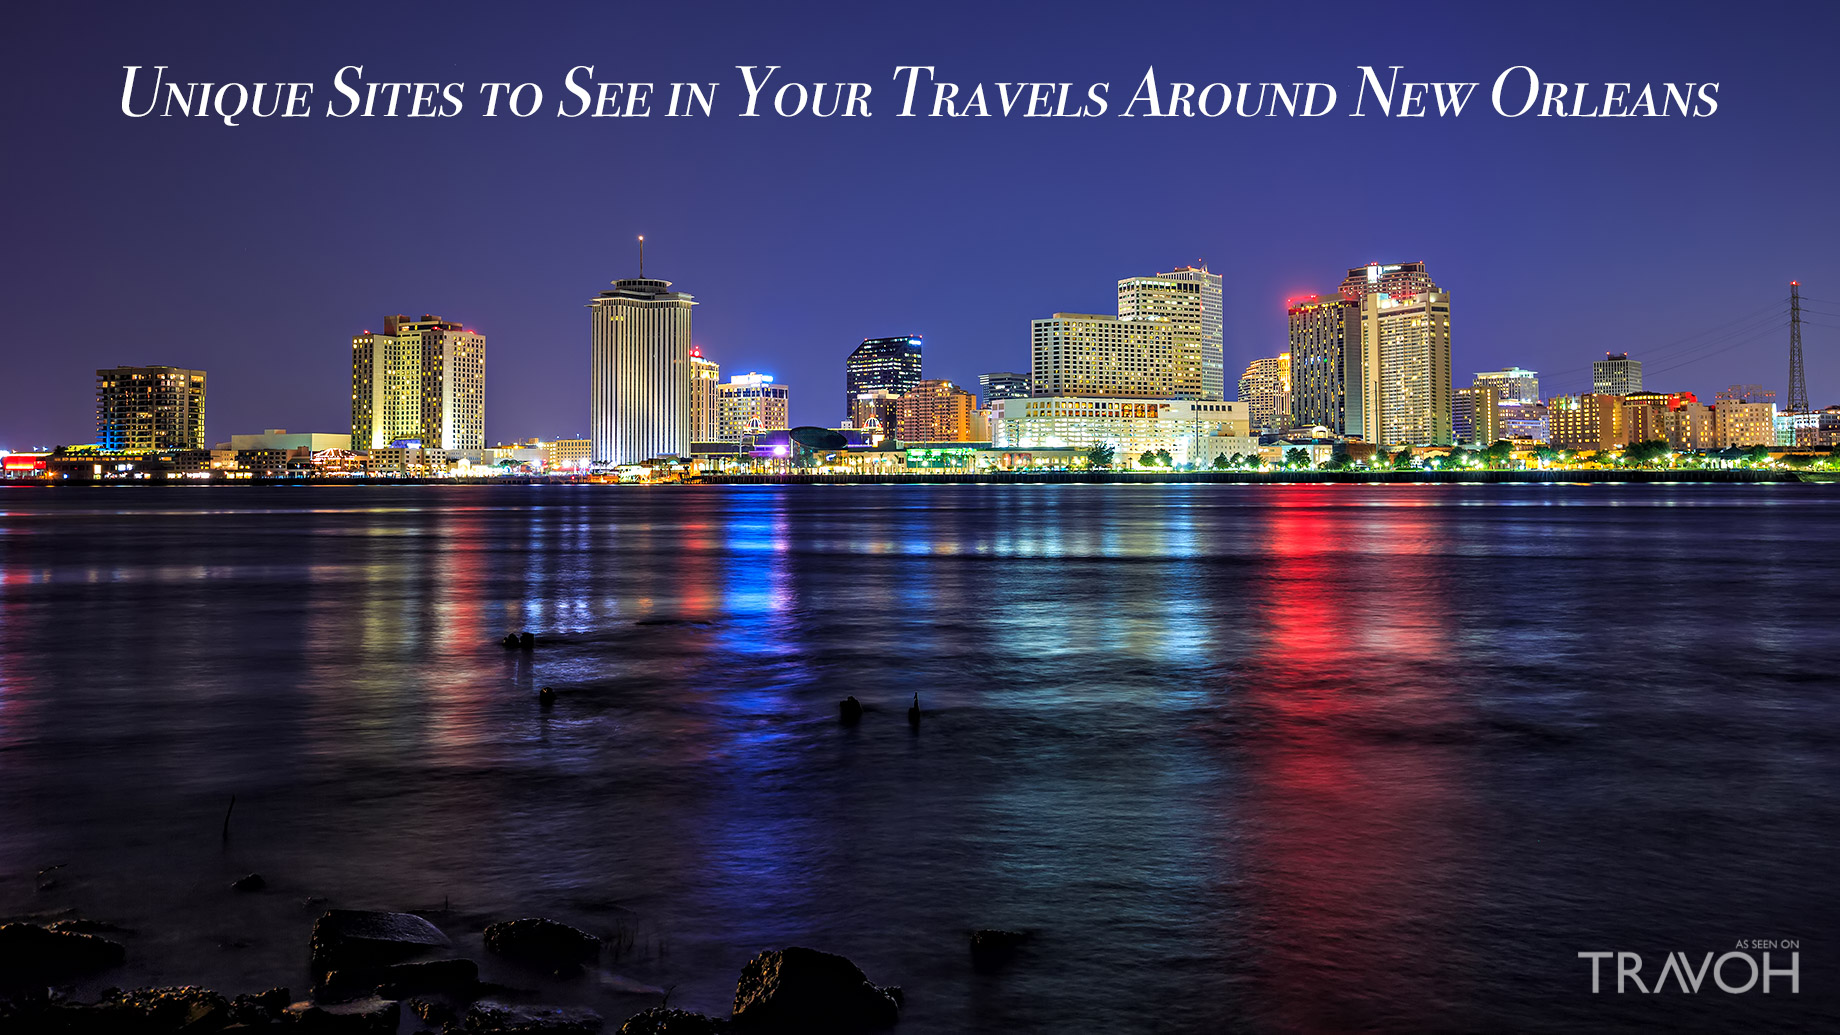 Unique Sites to See in Your Travels Around New Orleans, Louisiana